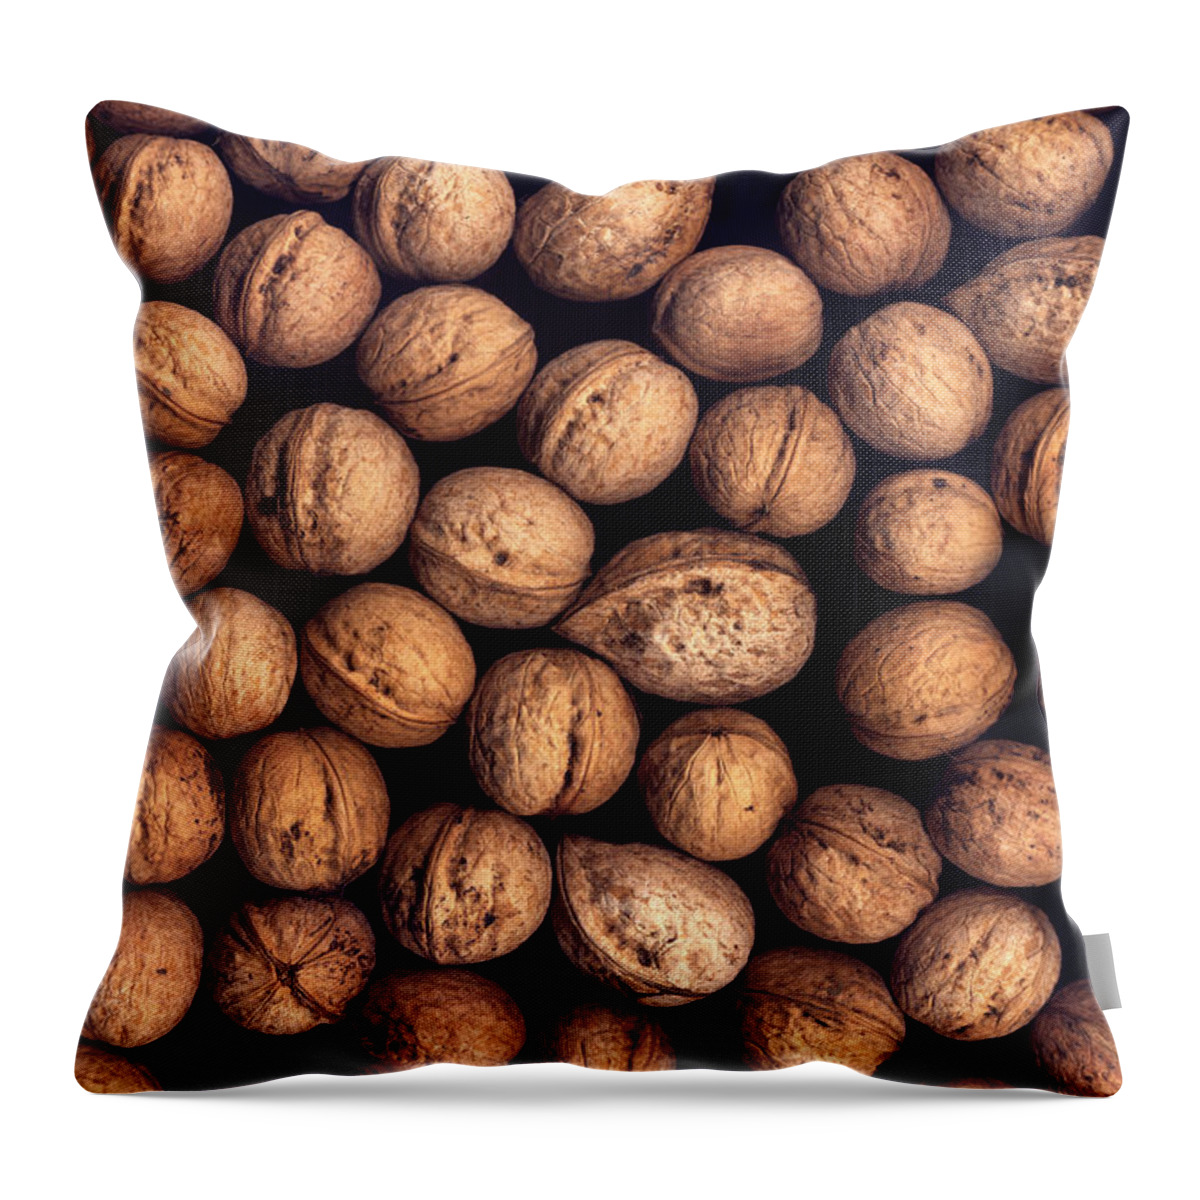 Nut Throw Pillow featuring the photograph Background of walnuts on a black background by Valentin Ivantsov